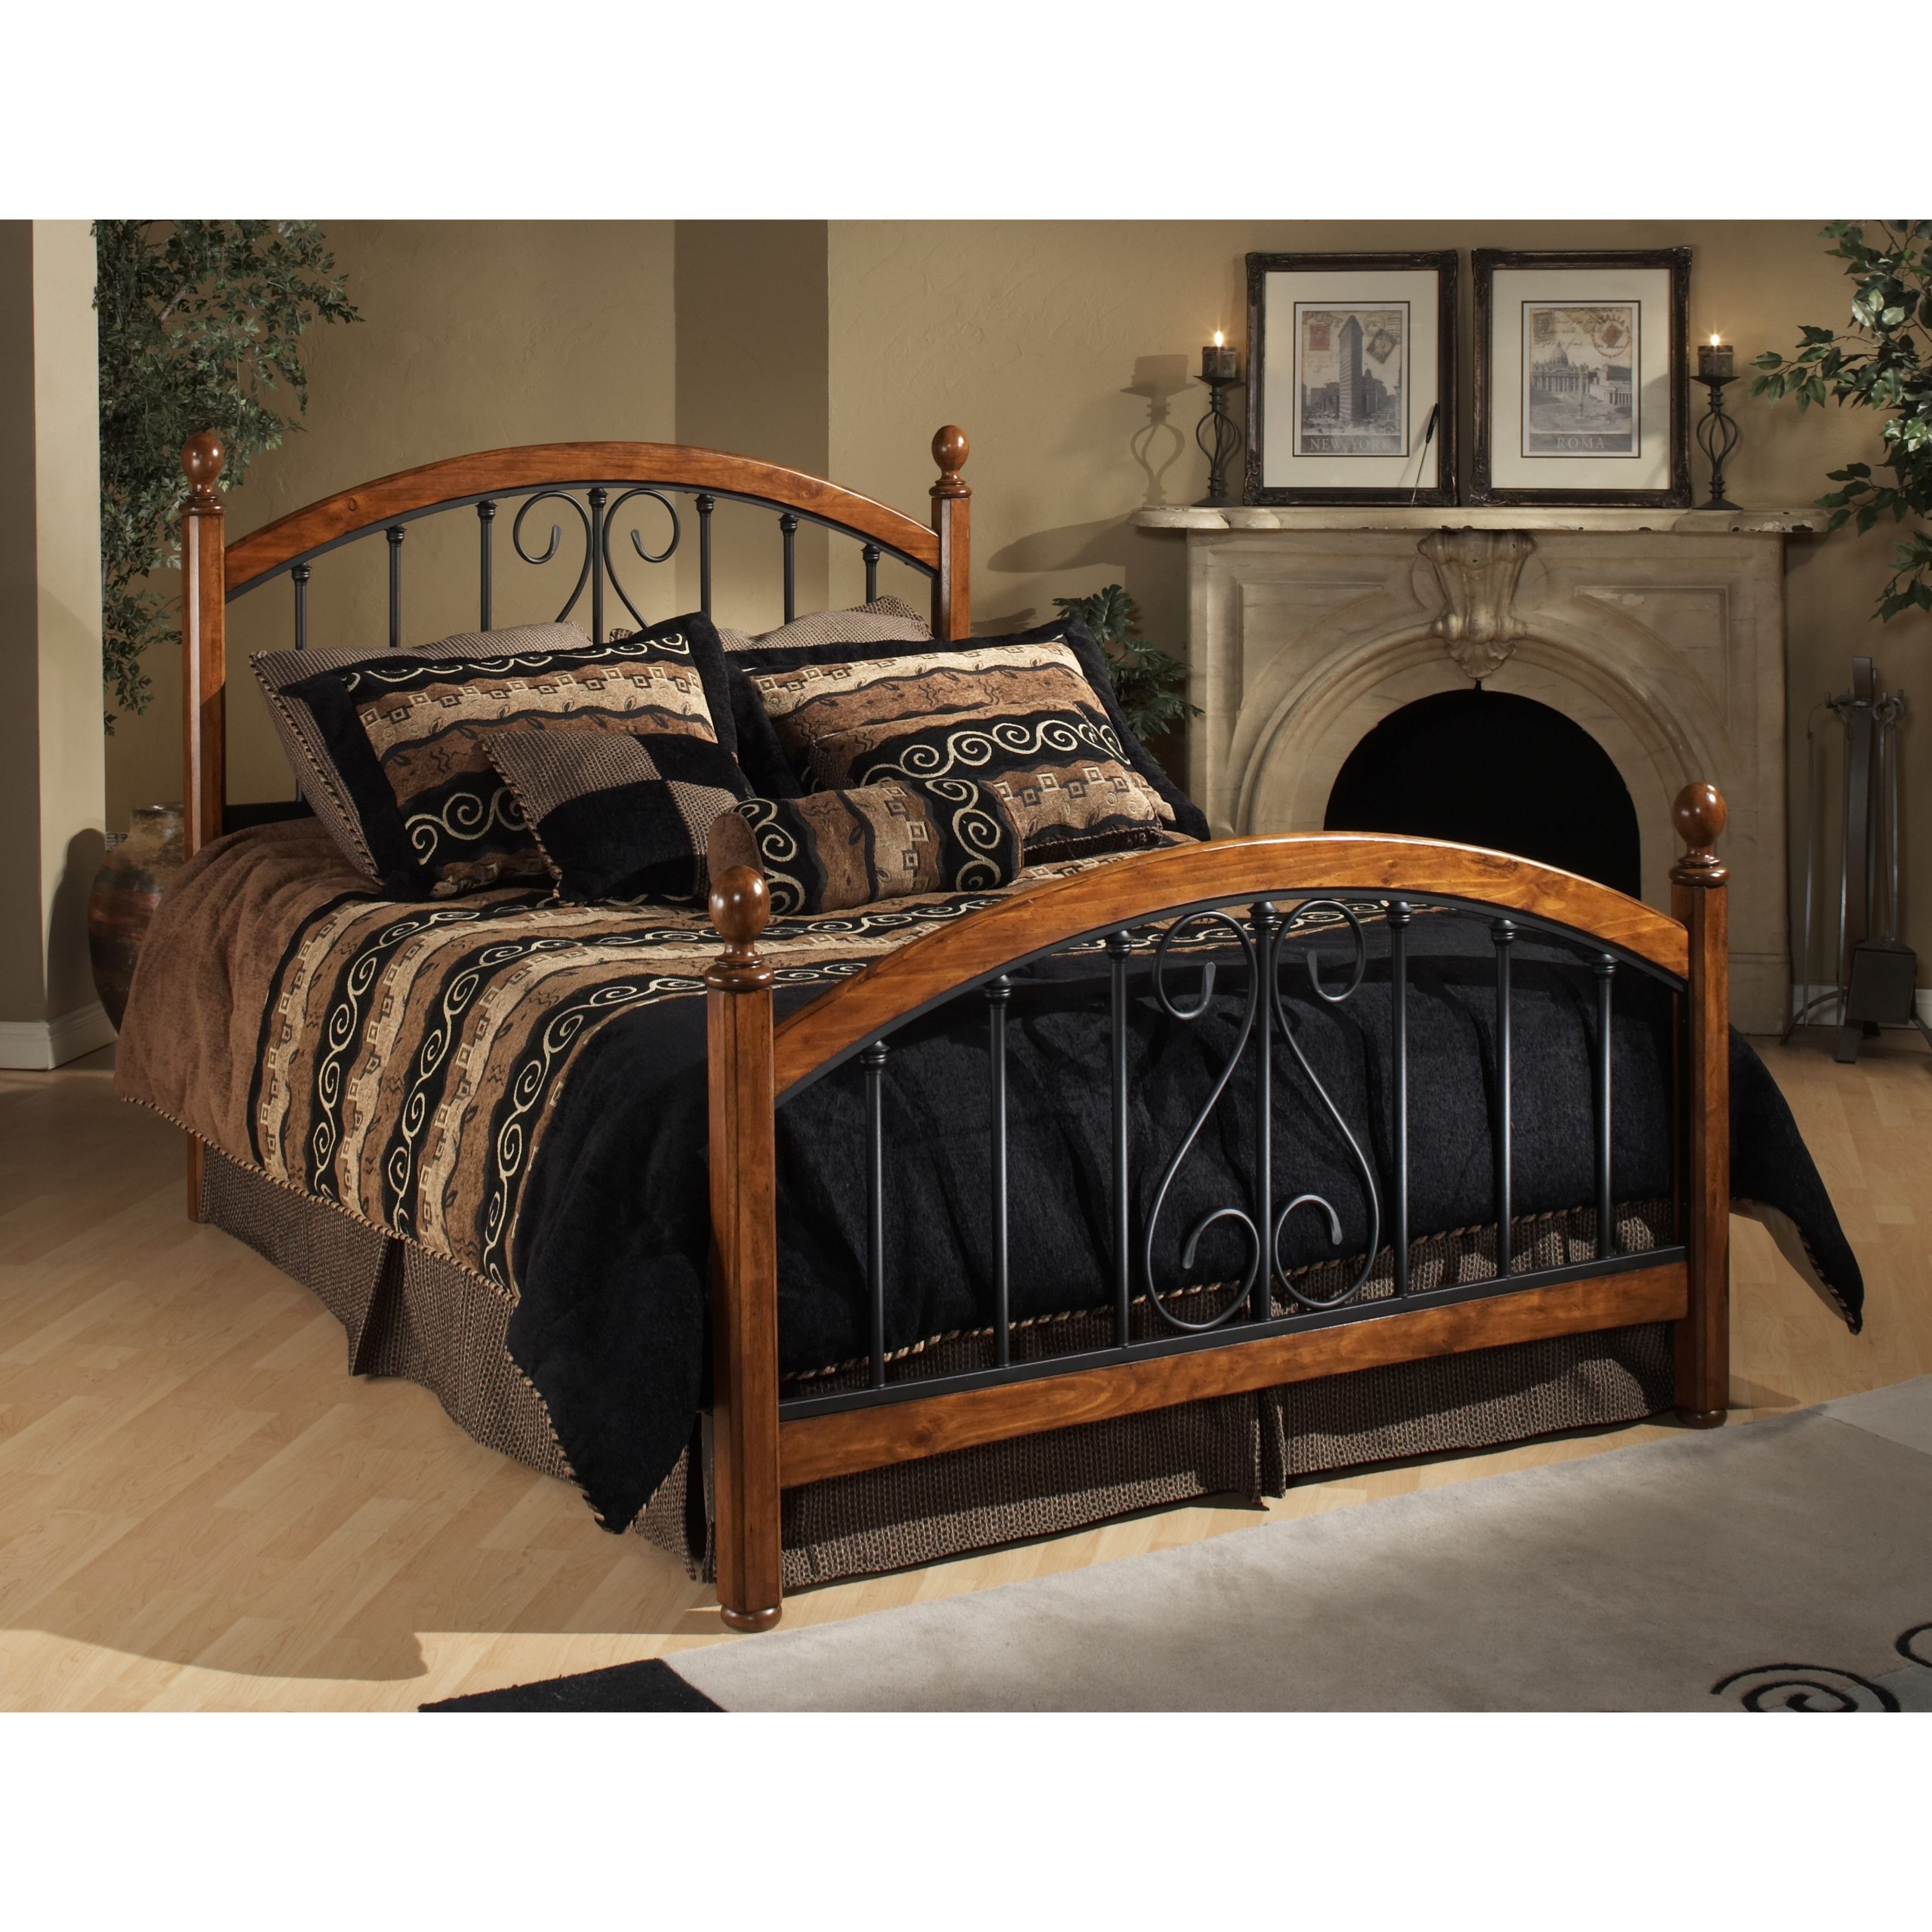 Rot iron bed design